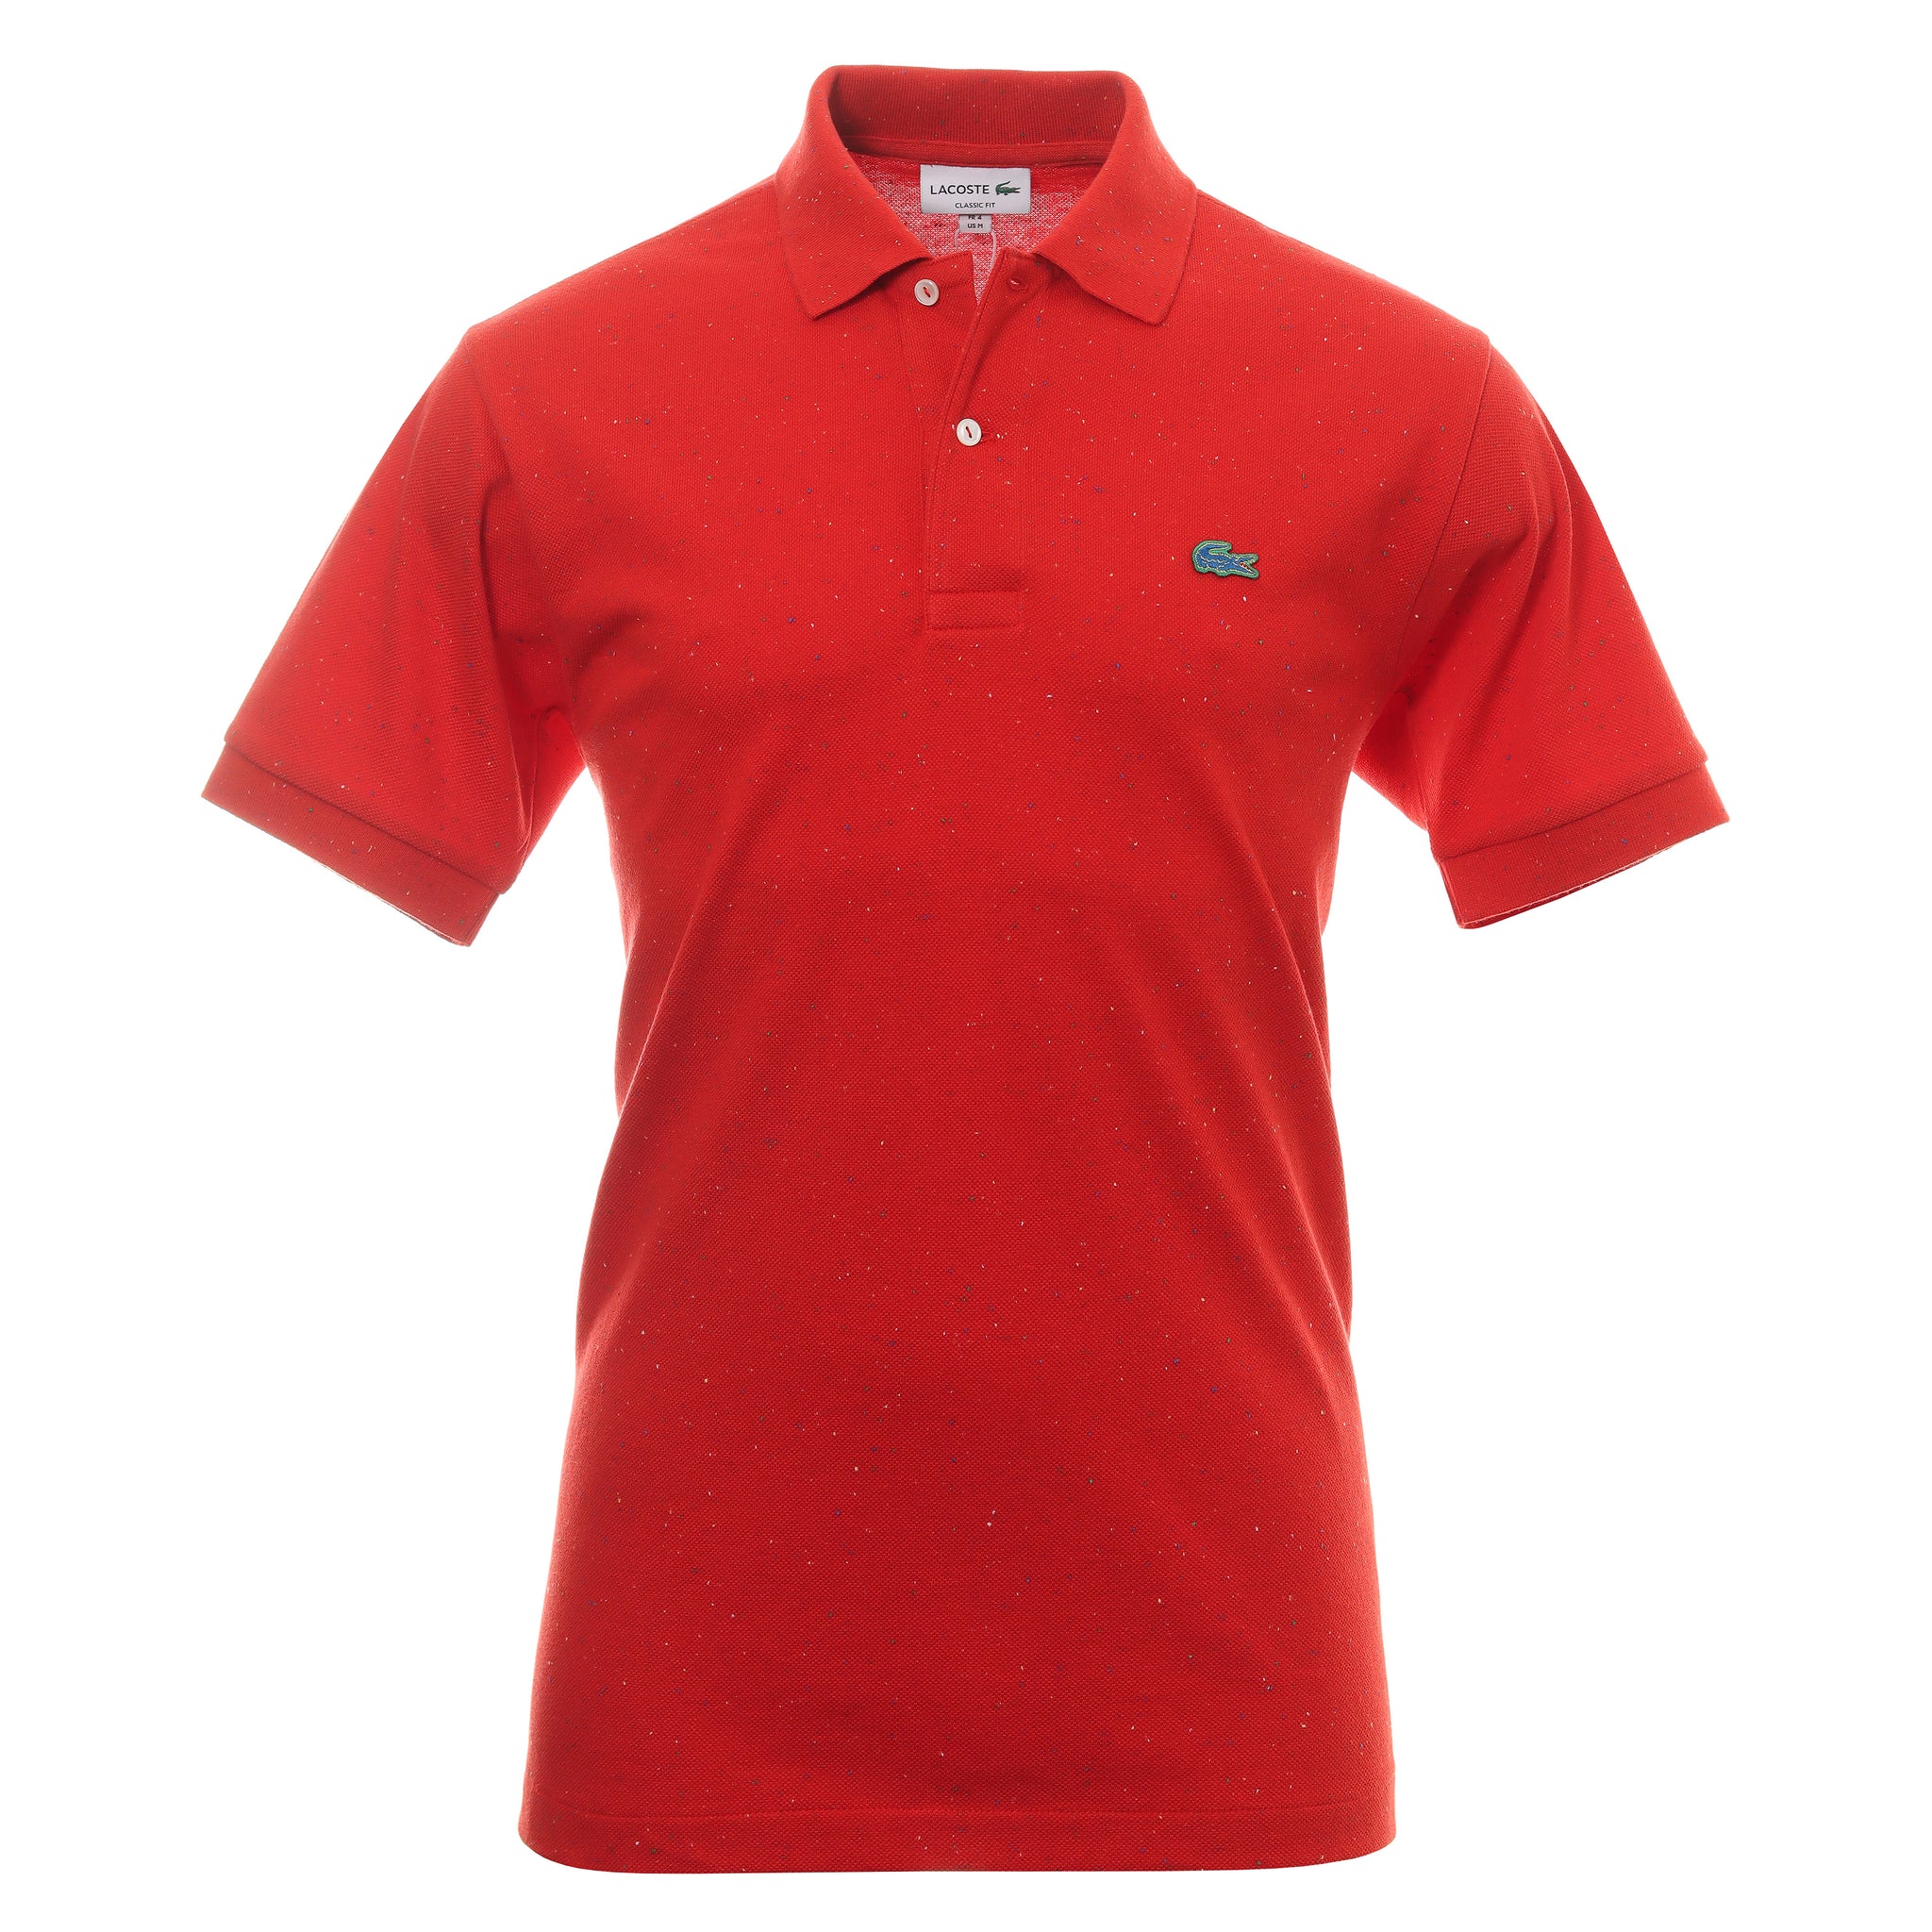 Lacoste Speckled Print Pique Polo Shirt PH2363 Red 7CQ | Function18 ...